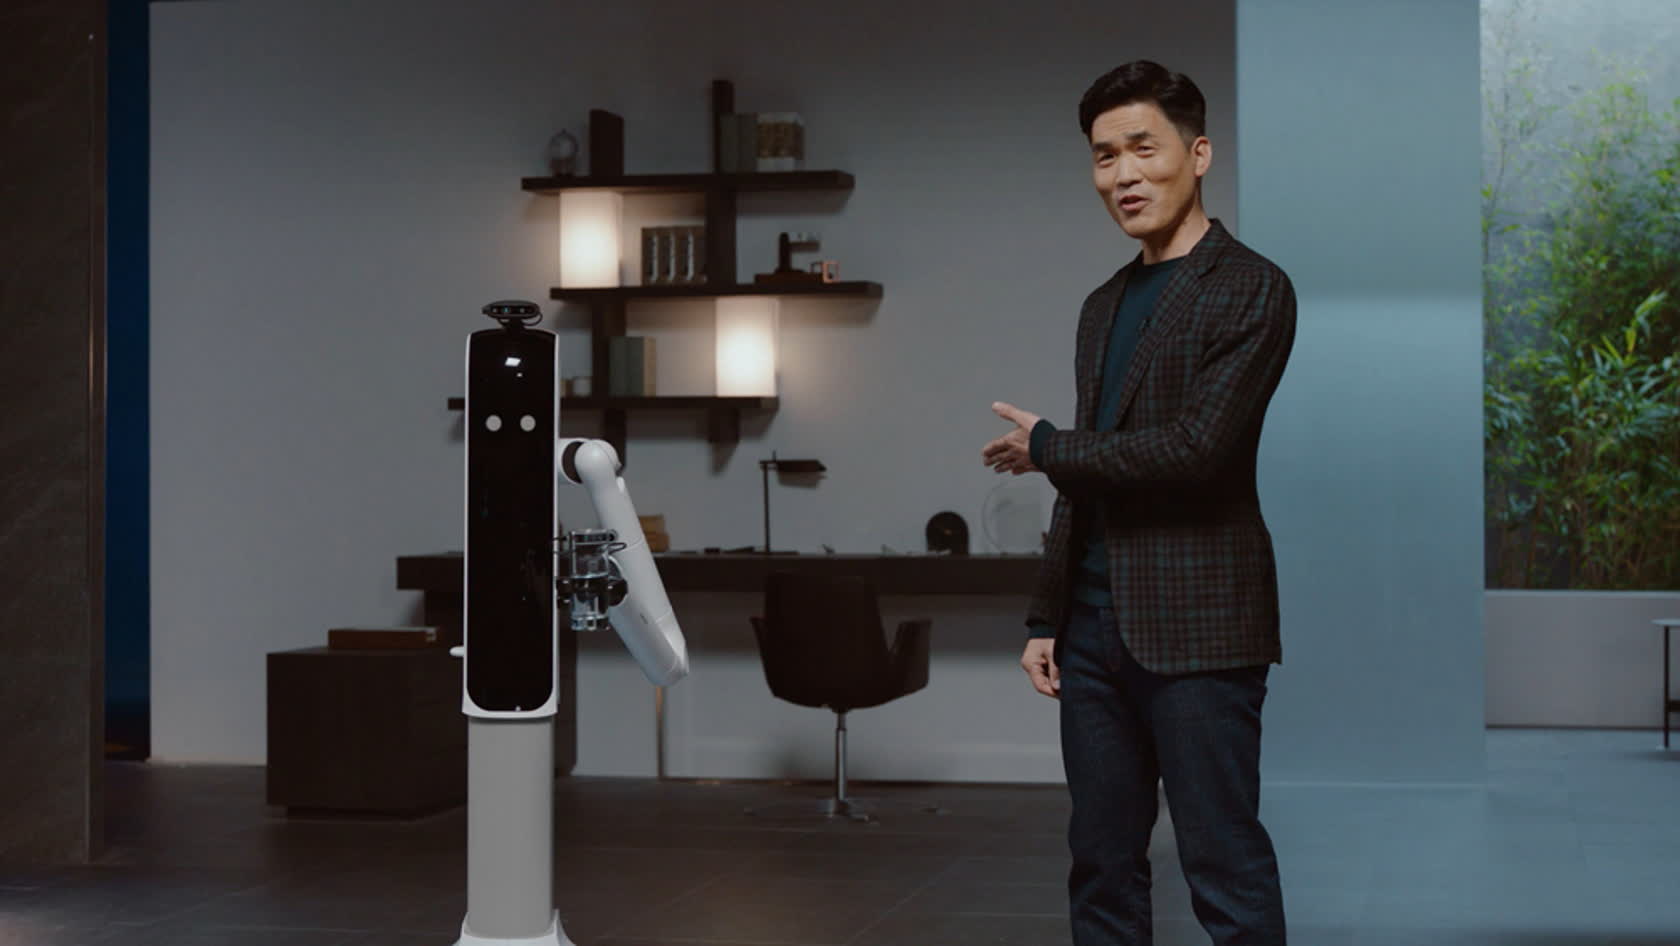 Samsung's 'Bot Handy' can put away dishes, set a table, and pour drinks for you